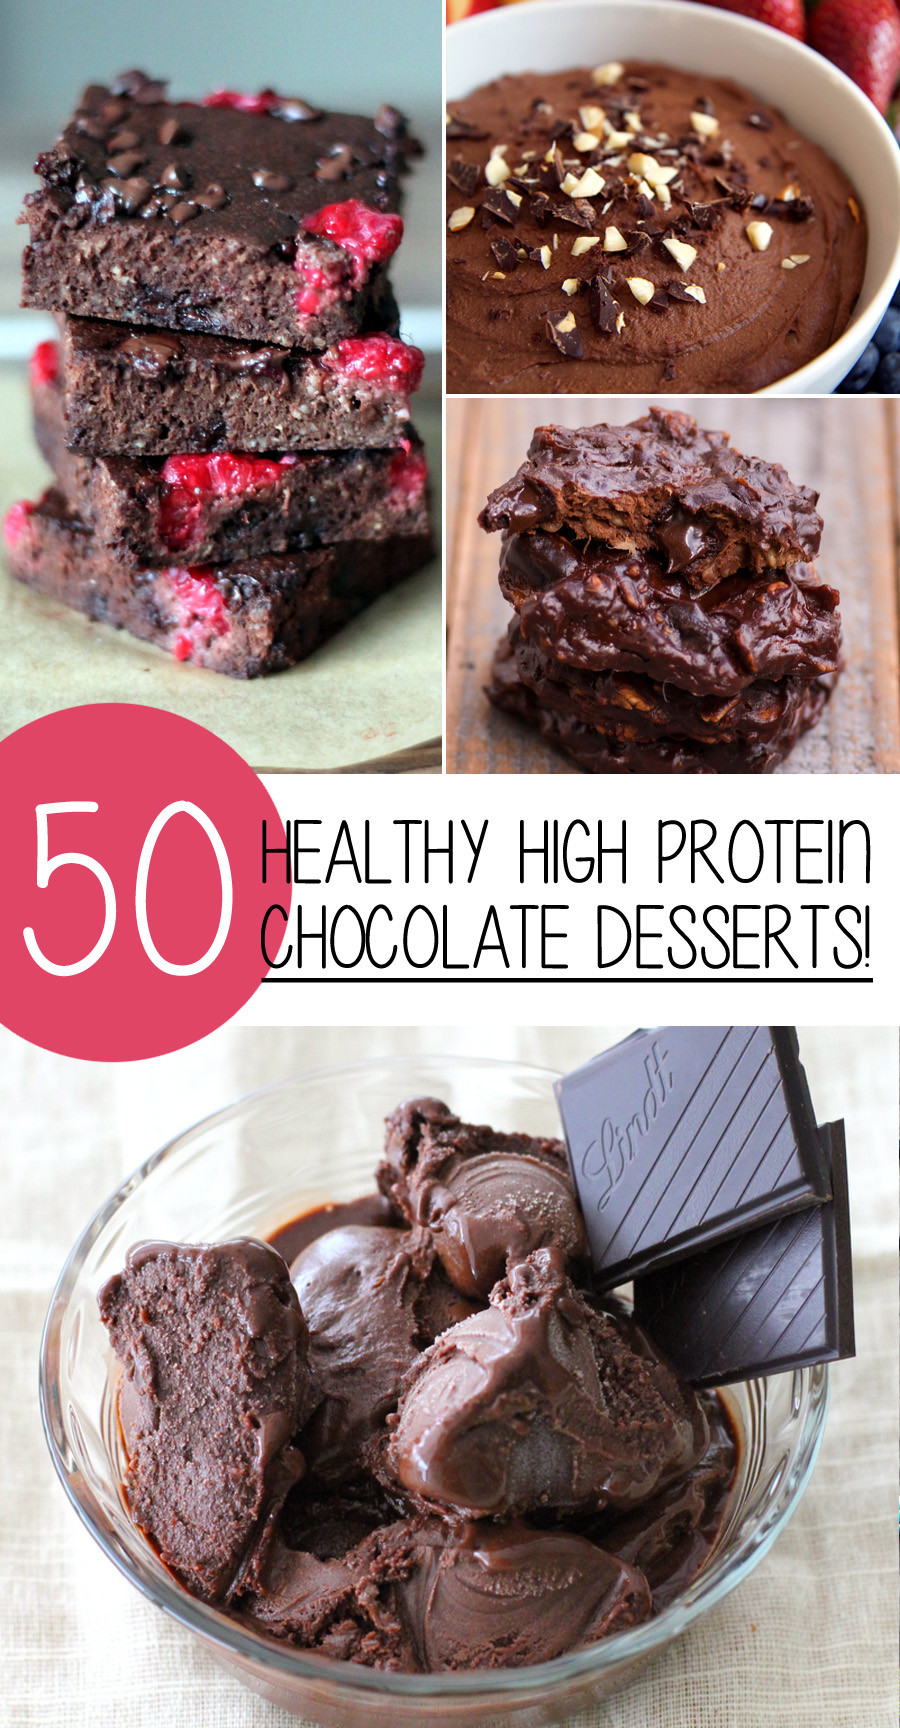 Healthy Protein Desserts
 50 Healthy High Protein Chocolate Desserts You Will Love